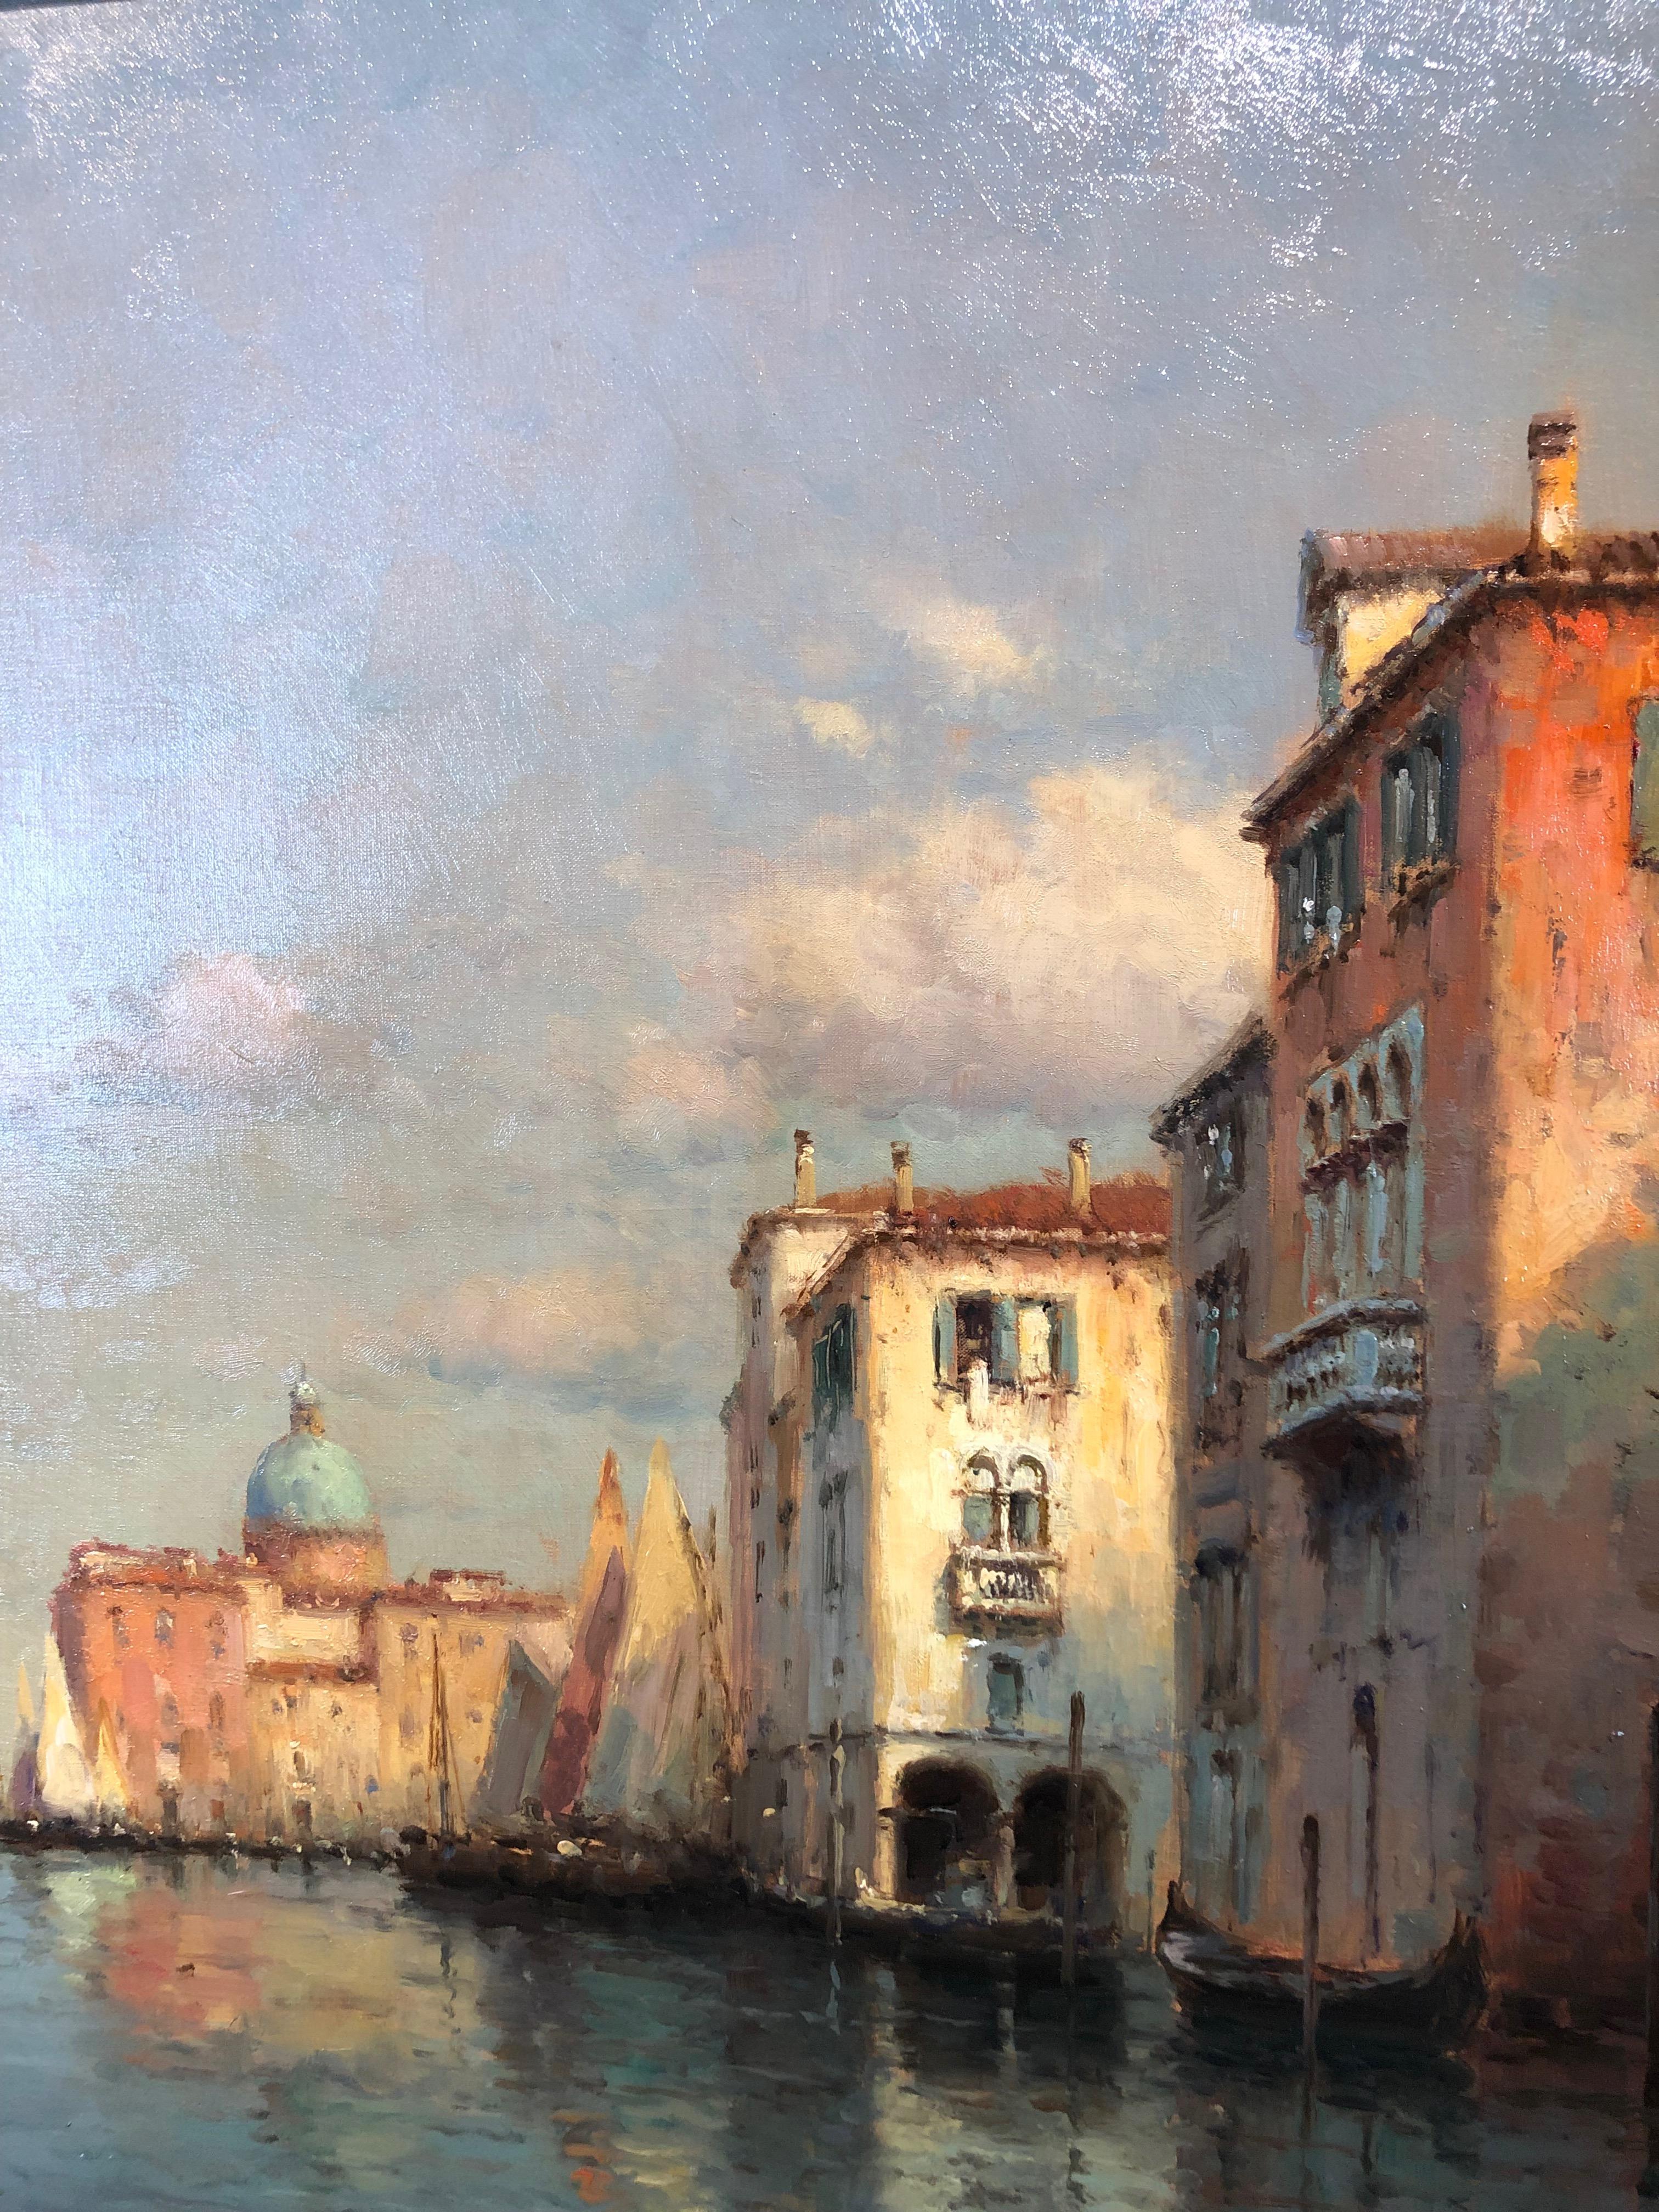 Georges Noel Bouvard, son of Antoine and father of Colette was taught by his father early on in life, quickly mastering the hot Italian sun reflecting on the buildings and canals of Venice.
Originally sold by E.Stacy Marks in 1964.